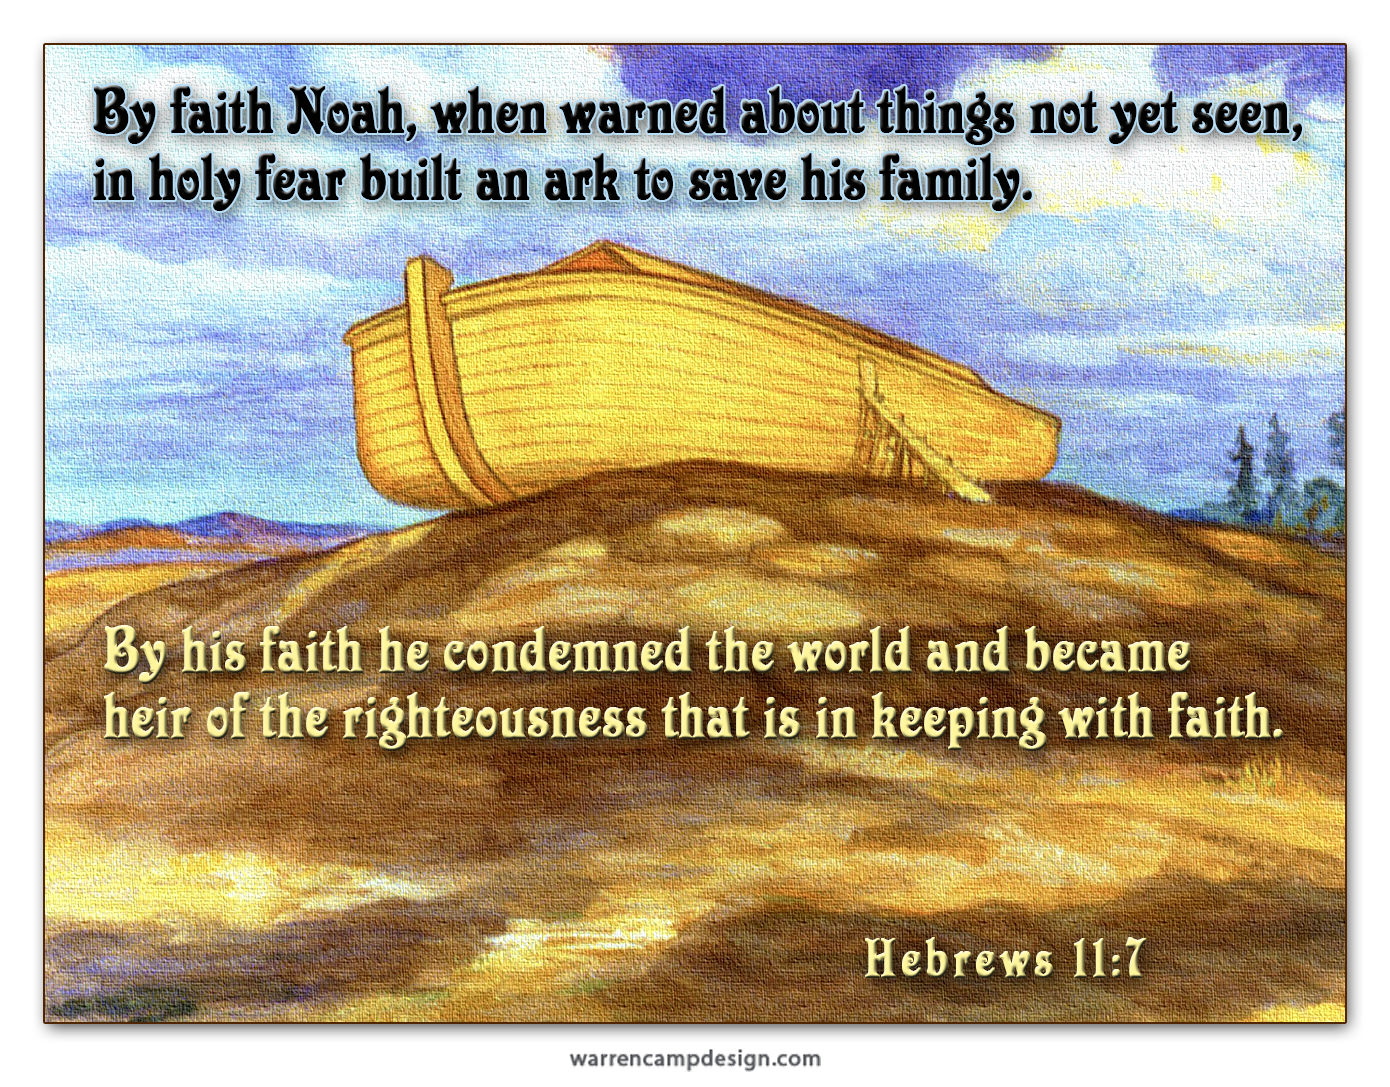 Warren Camp's Scripture picture of Hebrews 11:7, highlighting Noah's becomming heir of righteousness in keeping with faith